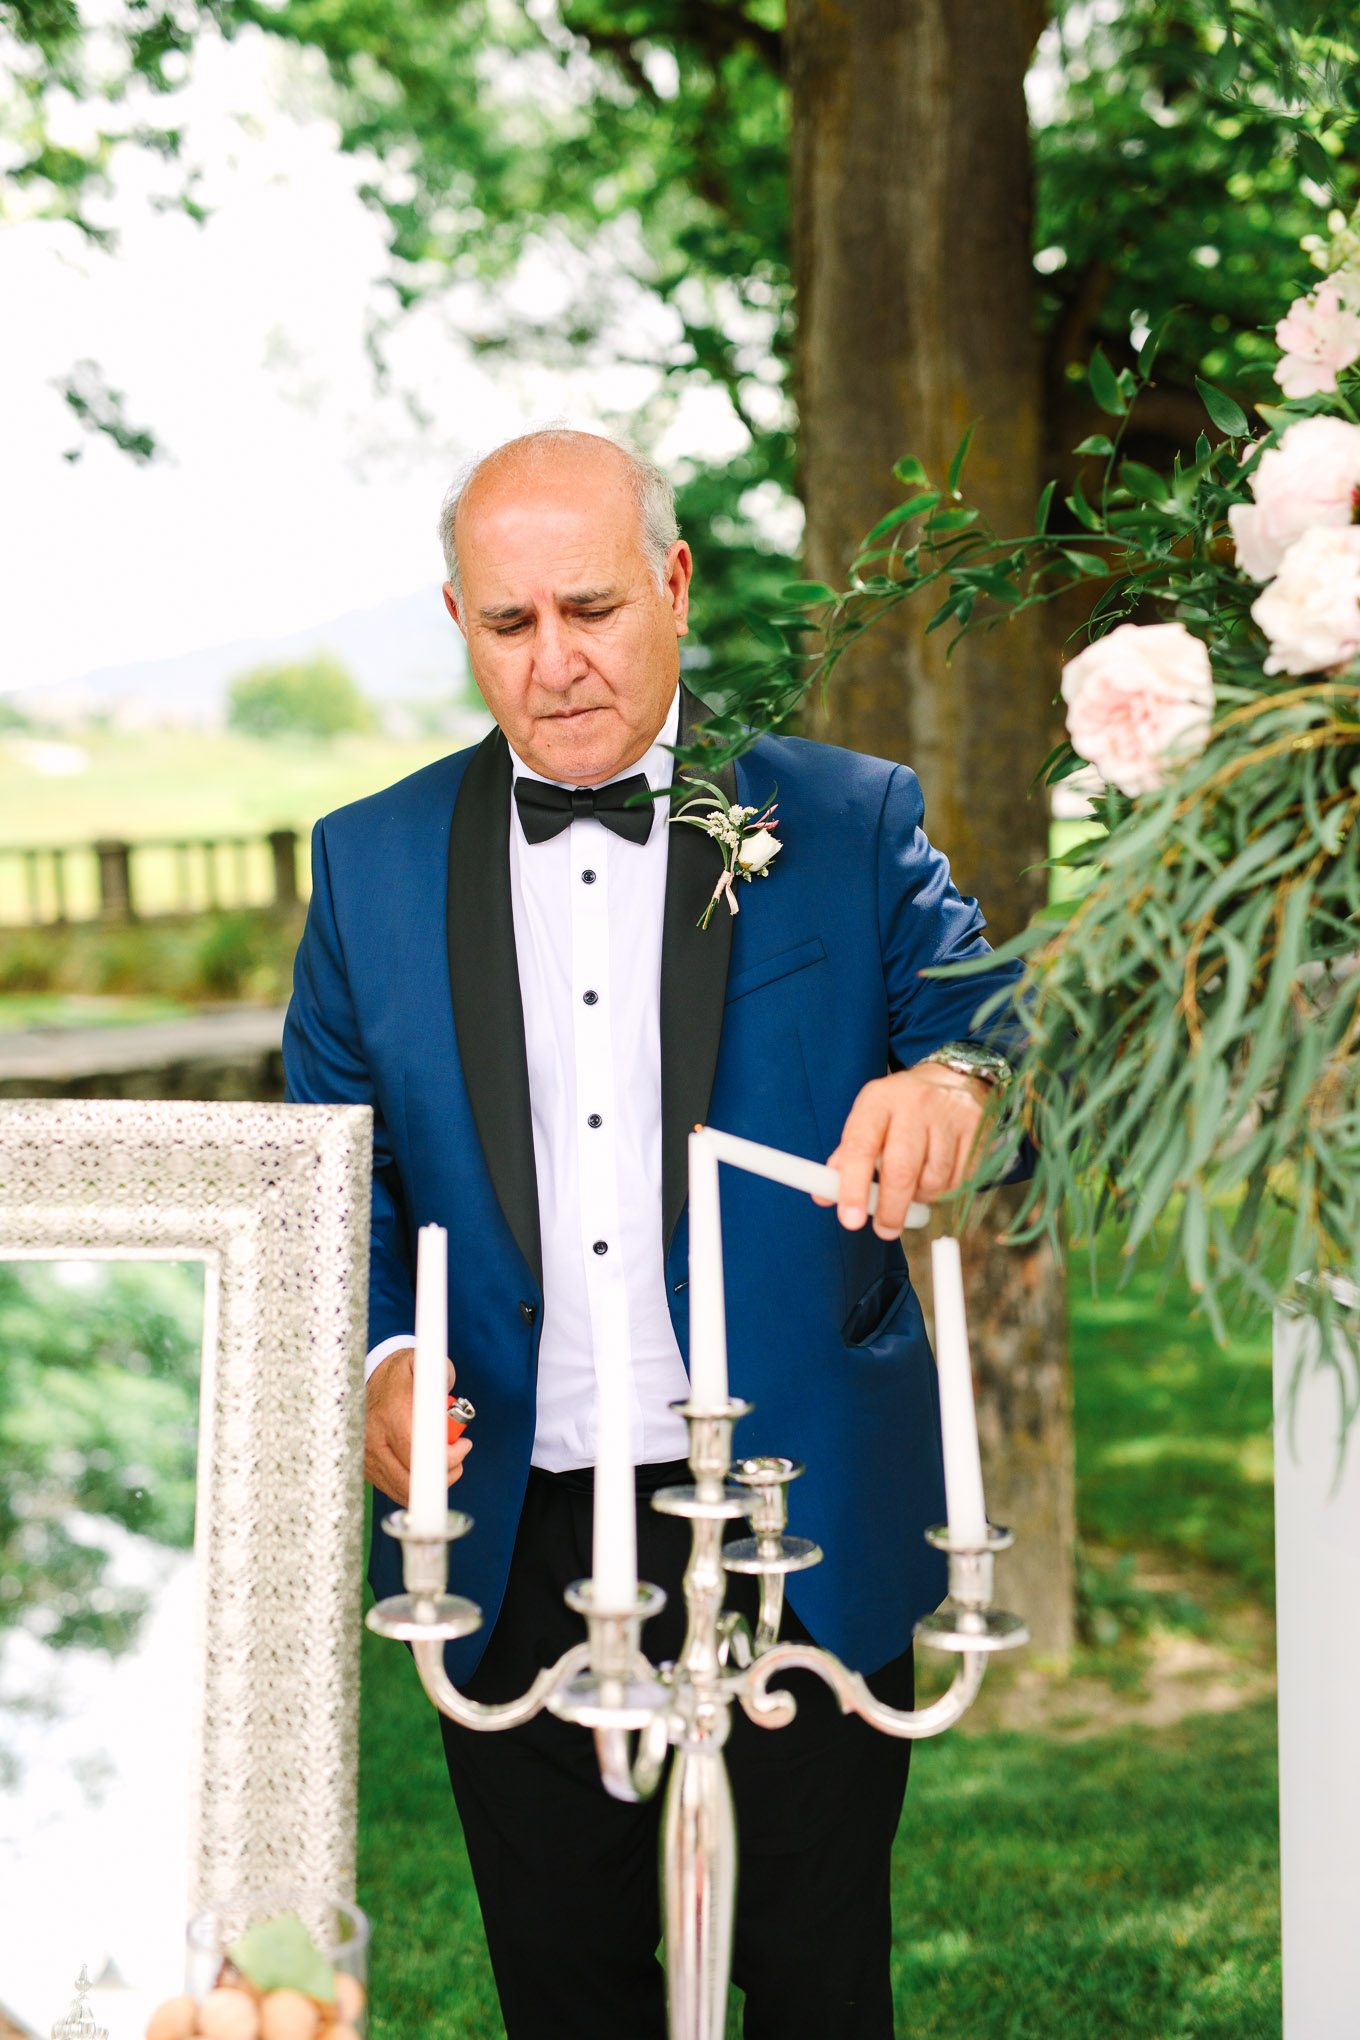 Groom's father lighting candle at Persian wedding ceremony. Millbrook Resort Queenstown New Zealand wedding by Mary Costa Photography | www.marycostaweddings.com